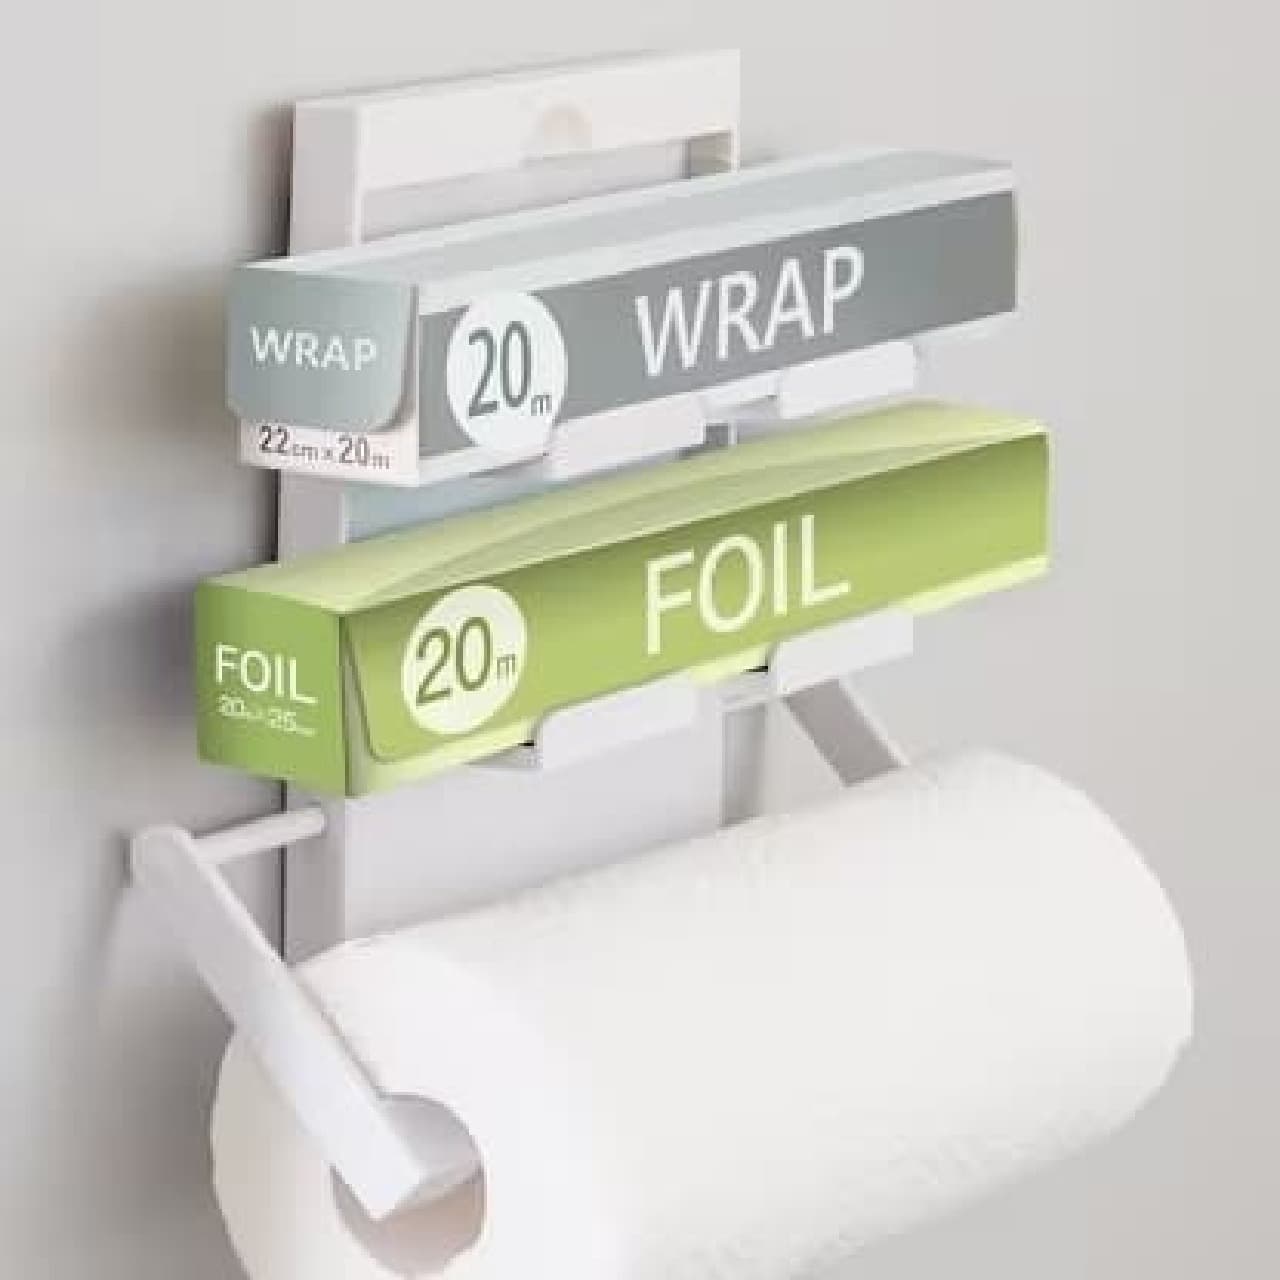 "Magnetic wrap paper holder" that sticks to the wall